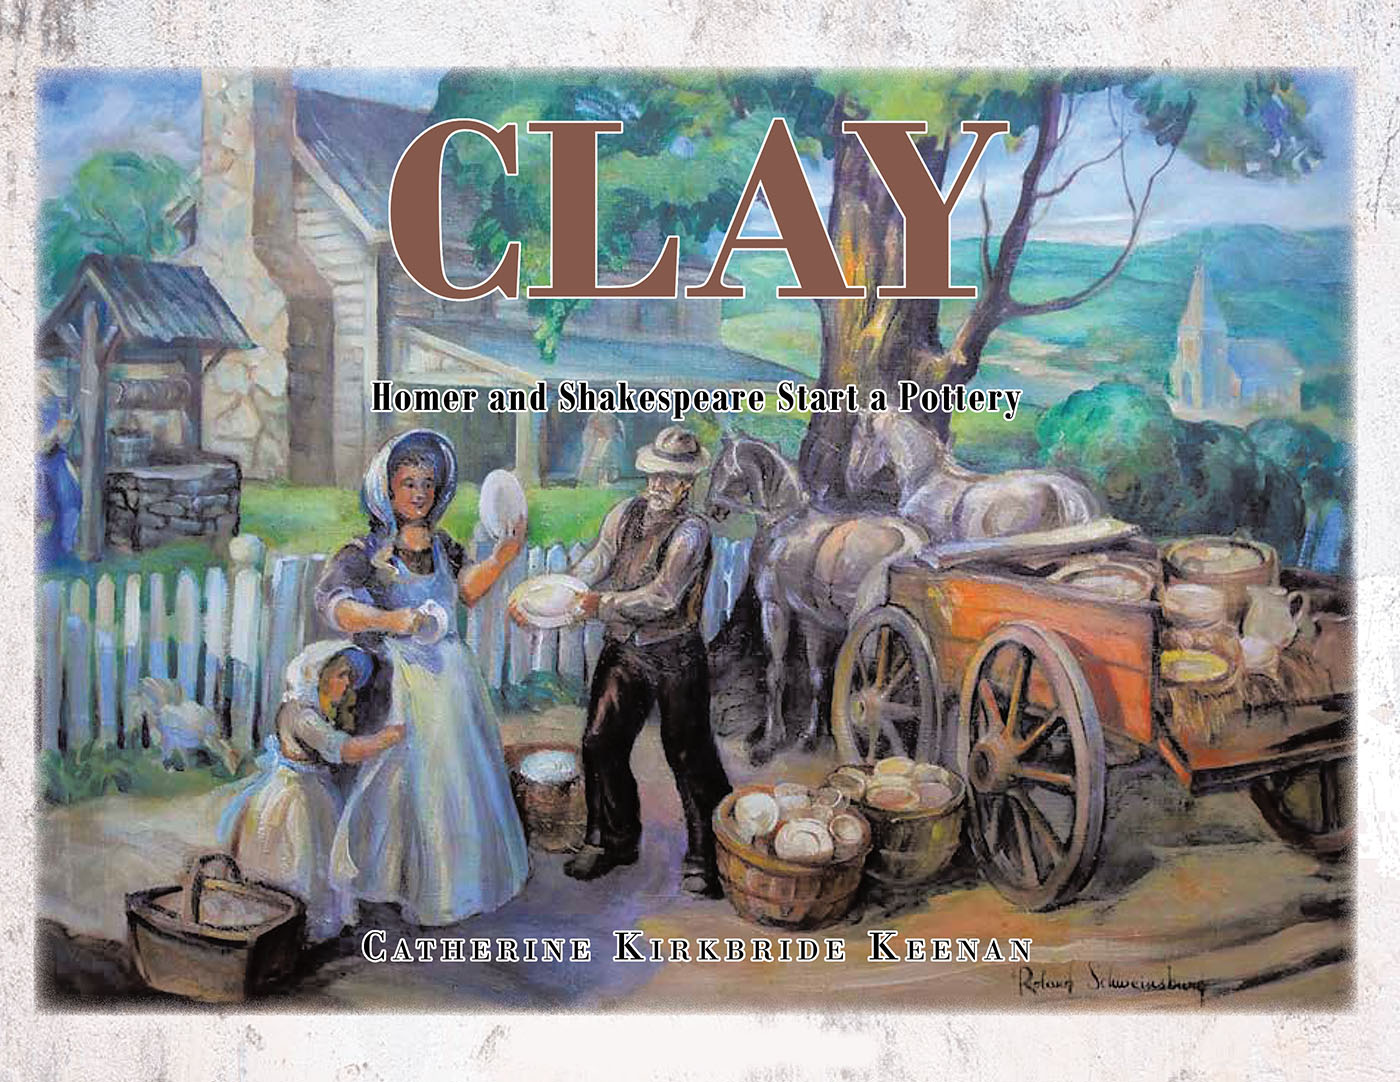 Catherine Kirkbride Keenan’s New Book, "Clay: Homer and Shakespeare Start a Pottery," Follows Two Brothers Who Open Up One of the Biggest Potteries in the World